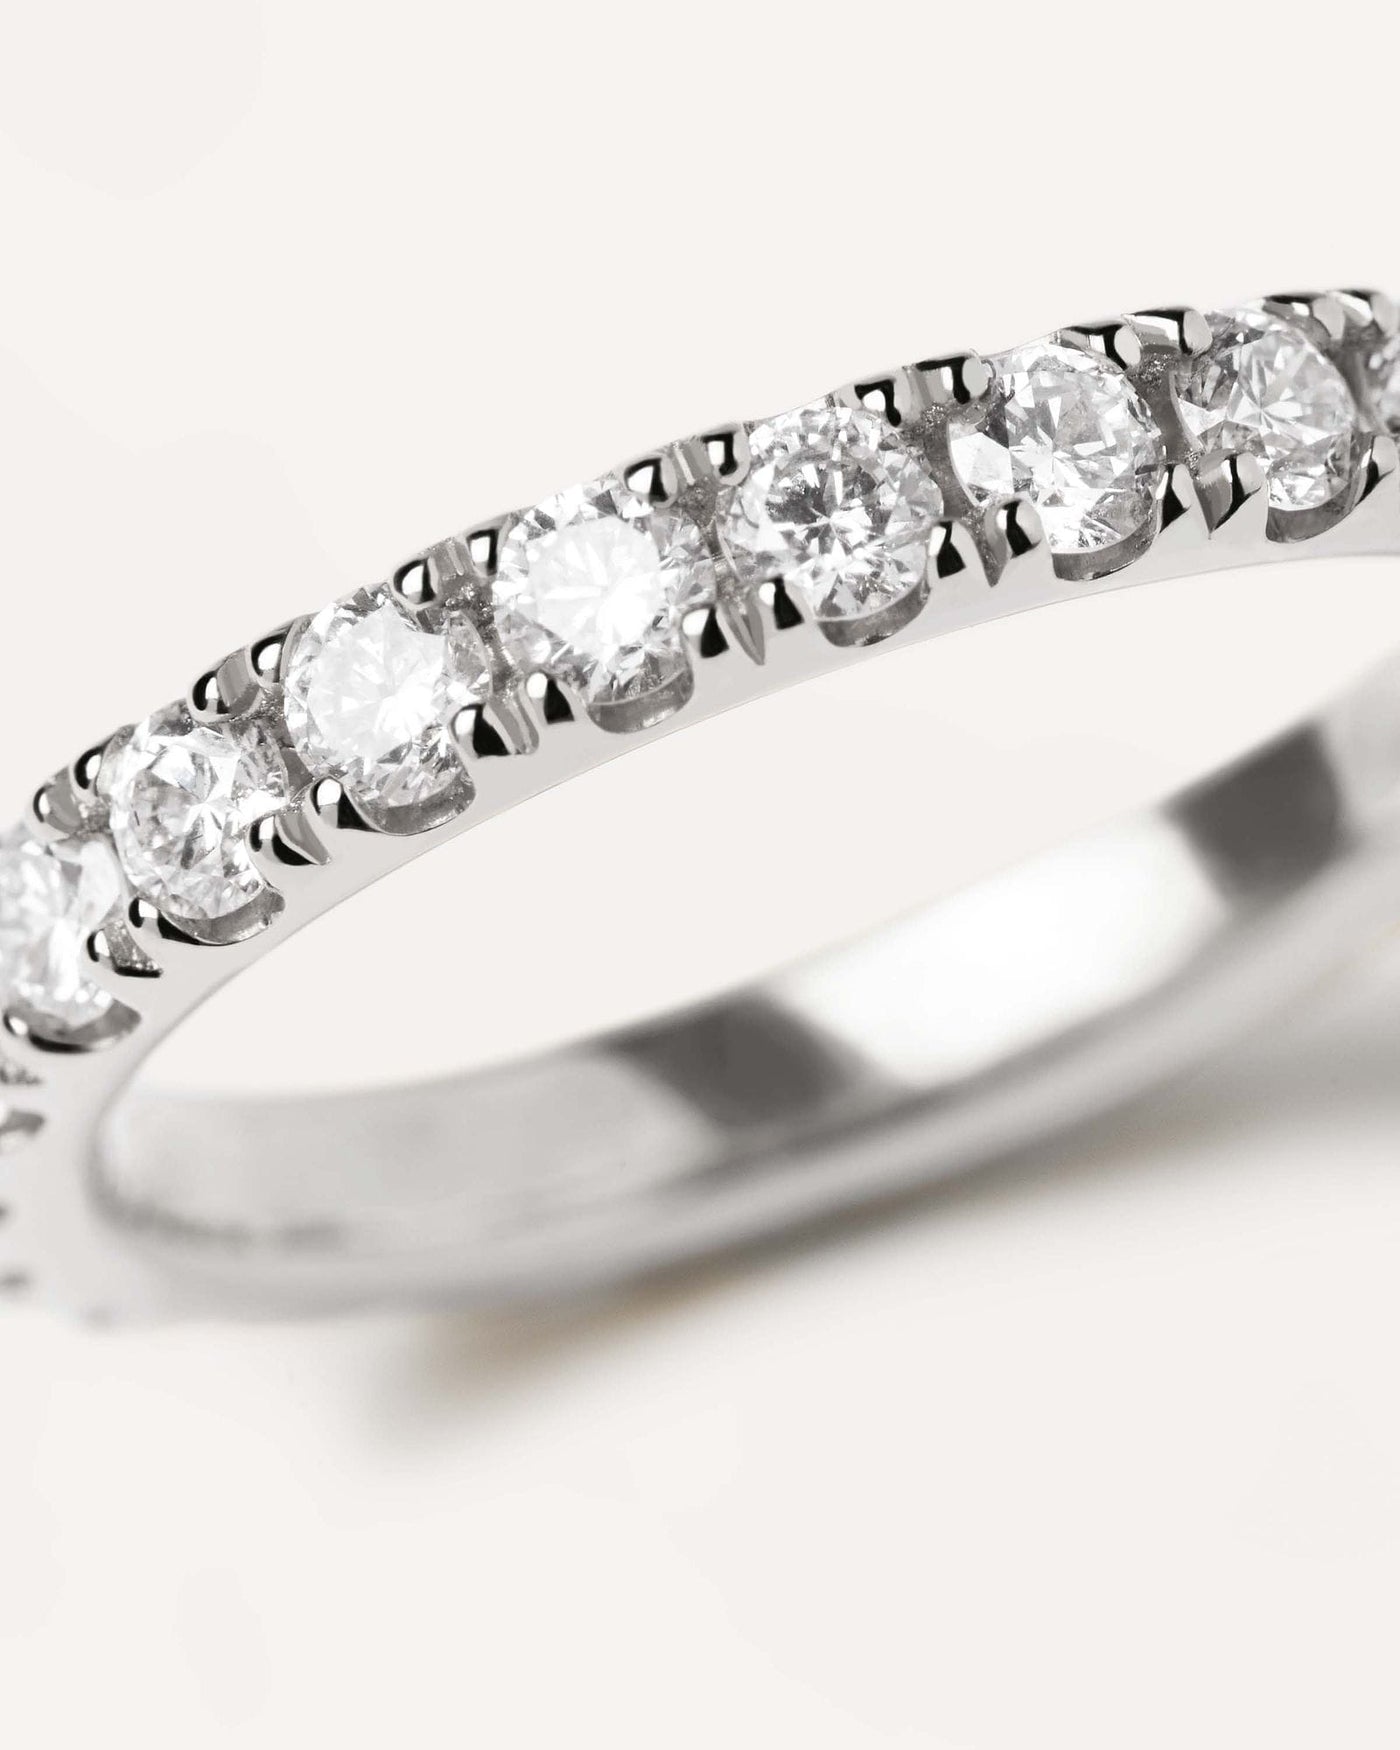 2024 Selection | Diamonds and White Gold Eternity Supreme Ring. 18K white gold eternity ring, set with big lab-grown diamonds, equaling 1.55 carats. Get the latest arrival from PDPAOLA. Place your order safely and get this Best Seller. Free Shipping.